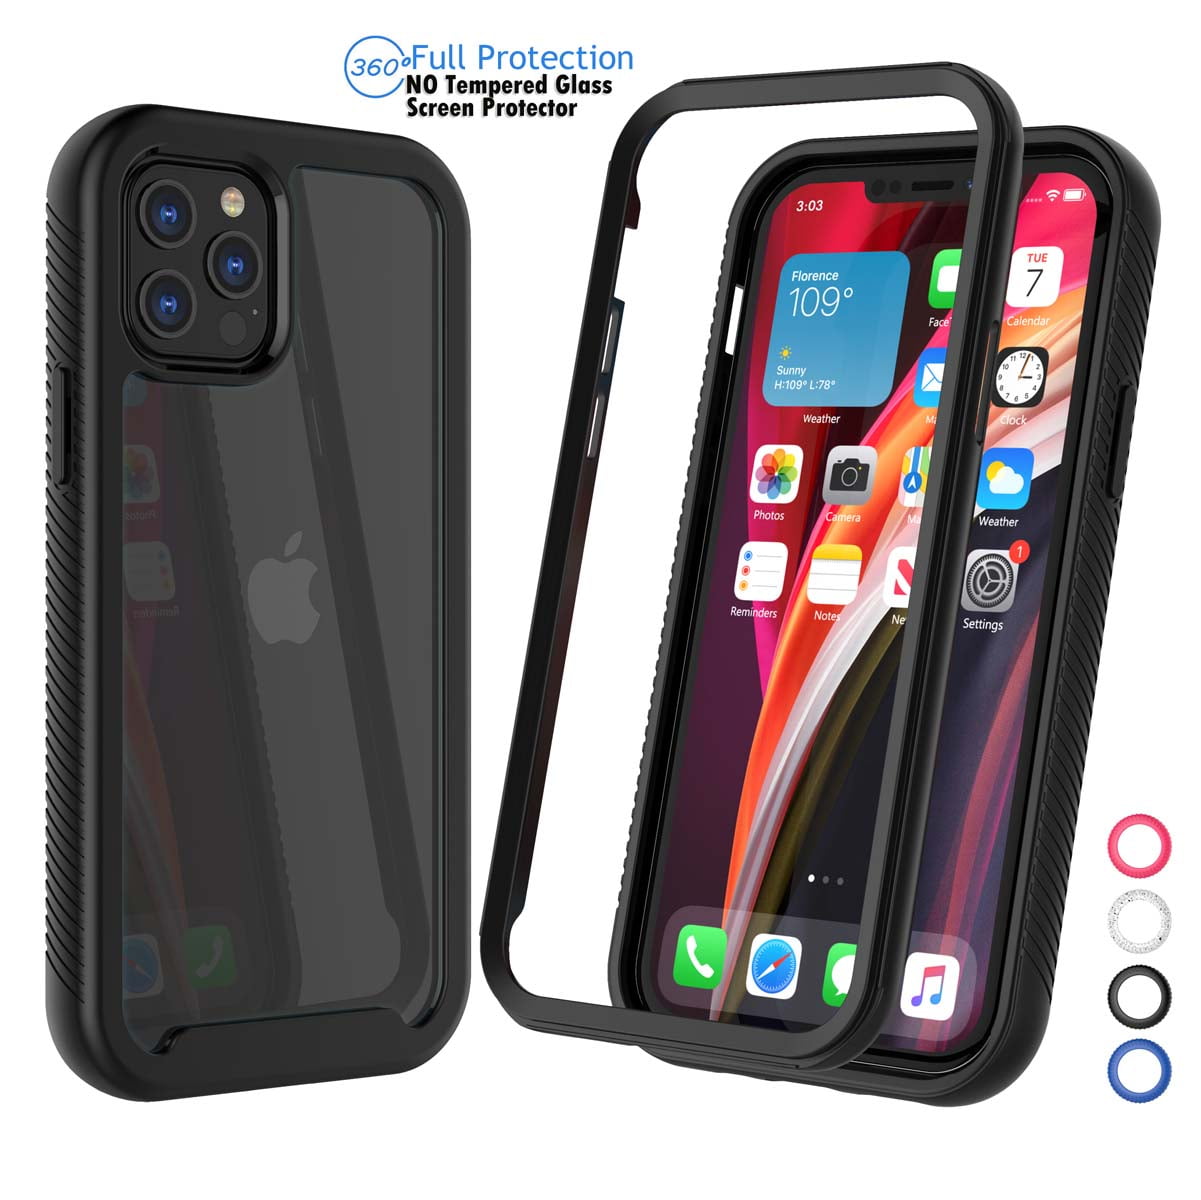 Back case for iPhone 12 Pro max Black